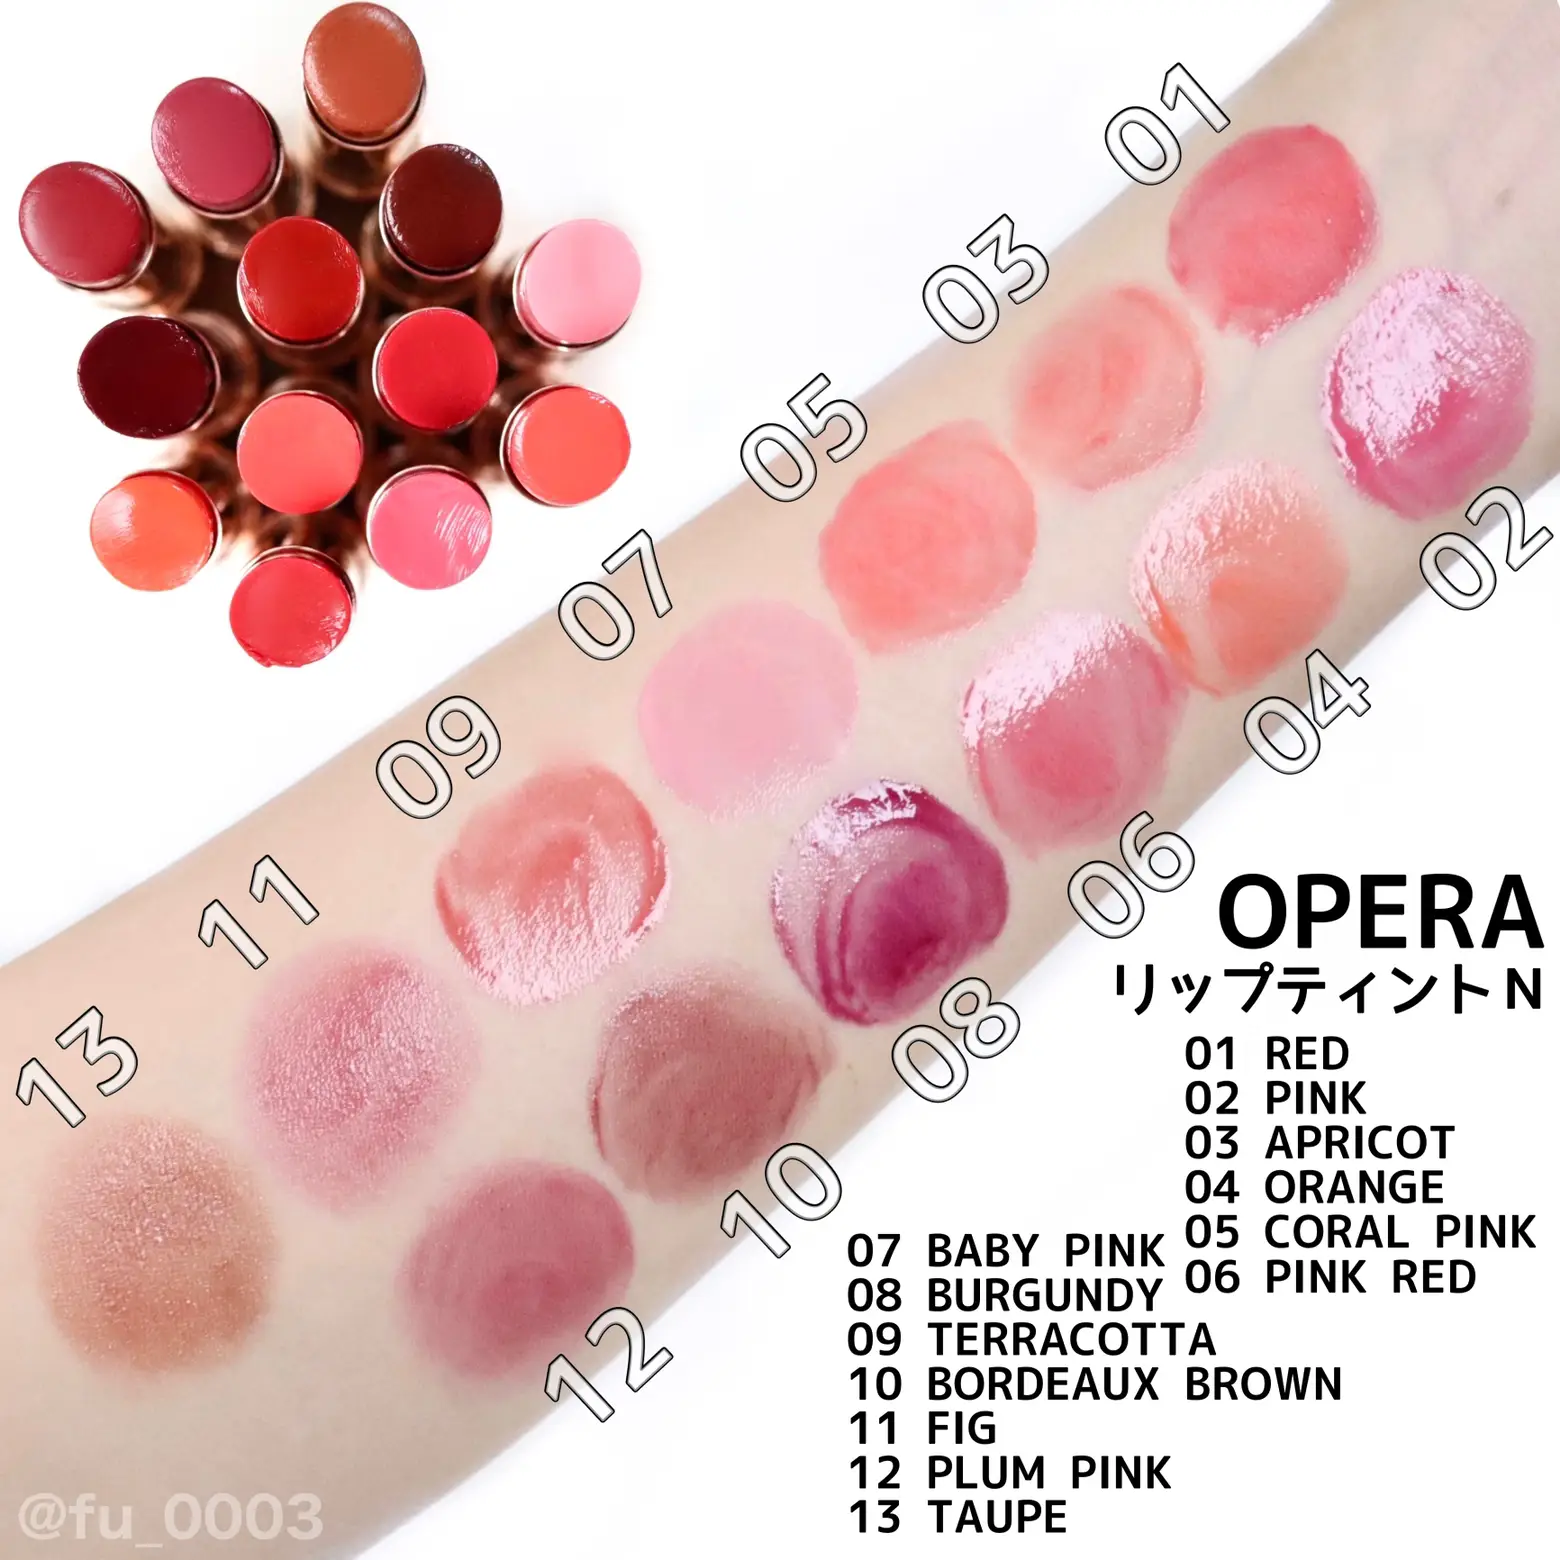 OPERA 】 Lip Tint N Standard 13 Colors | Gallery posted by ふうか